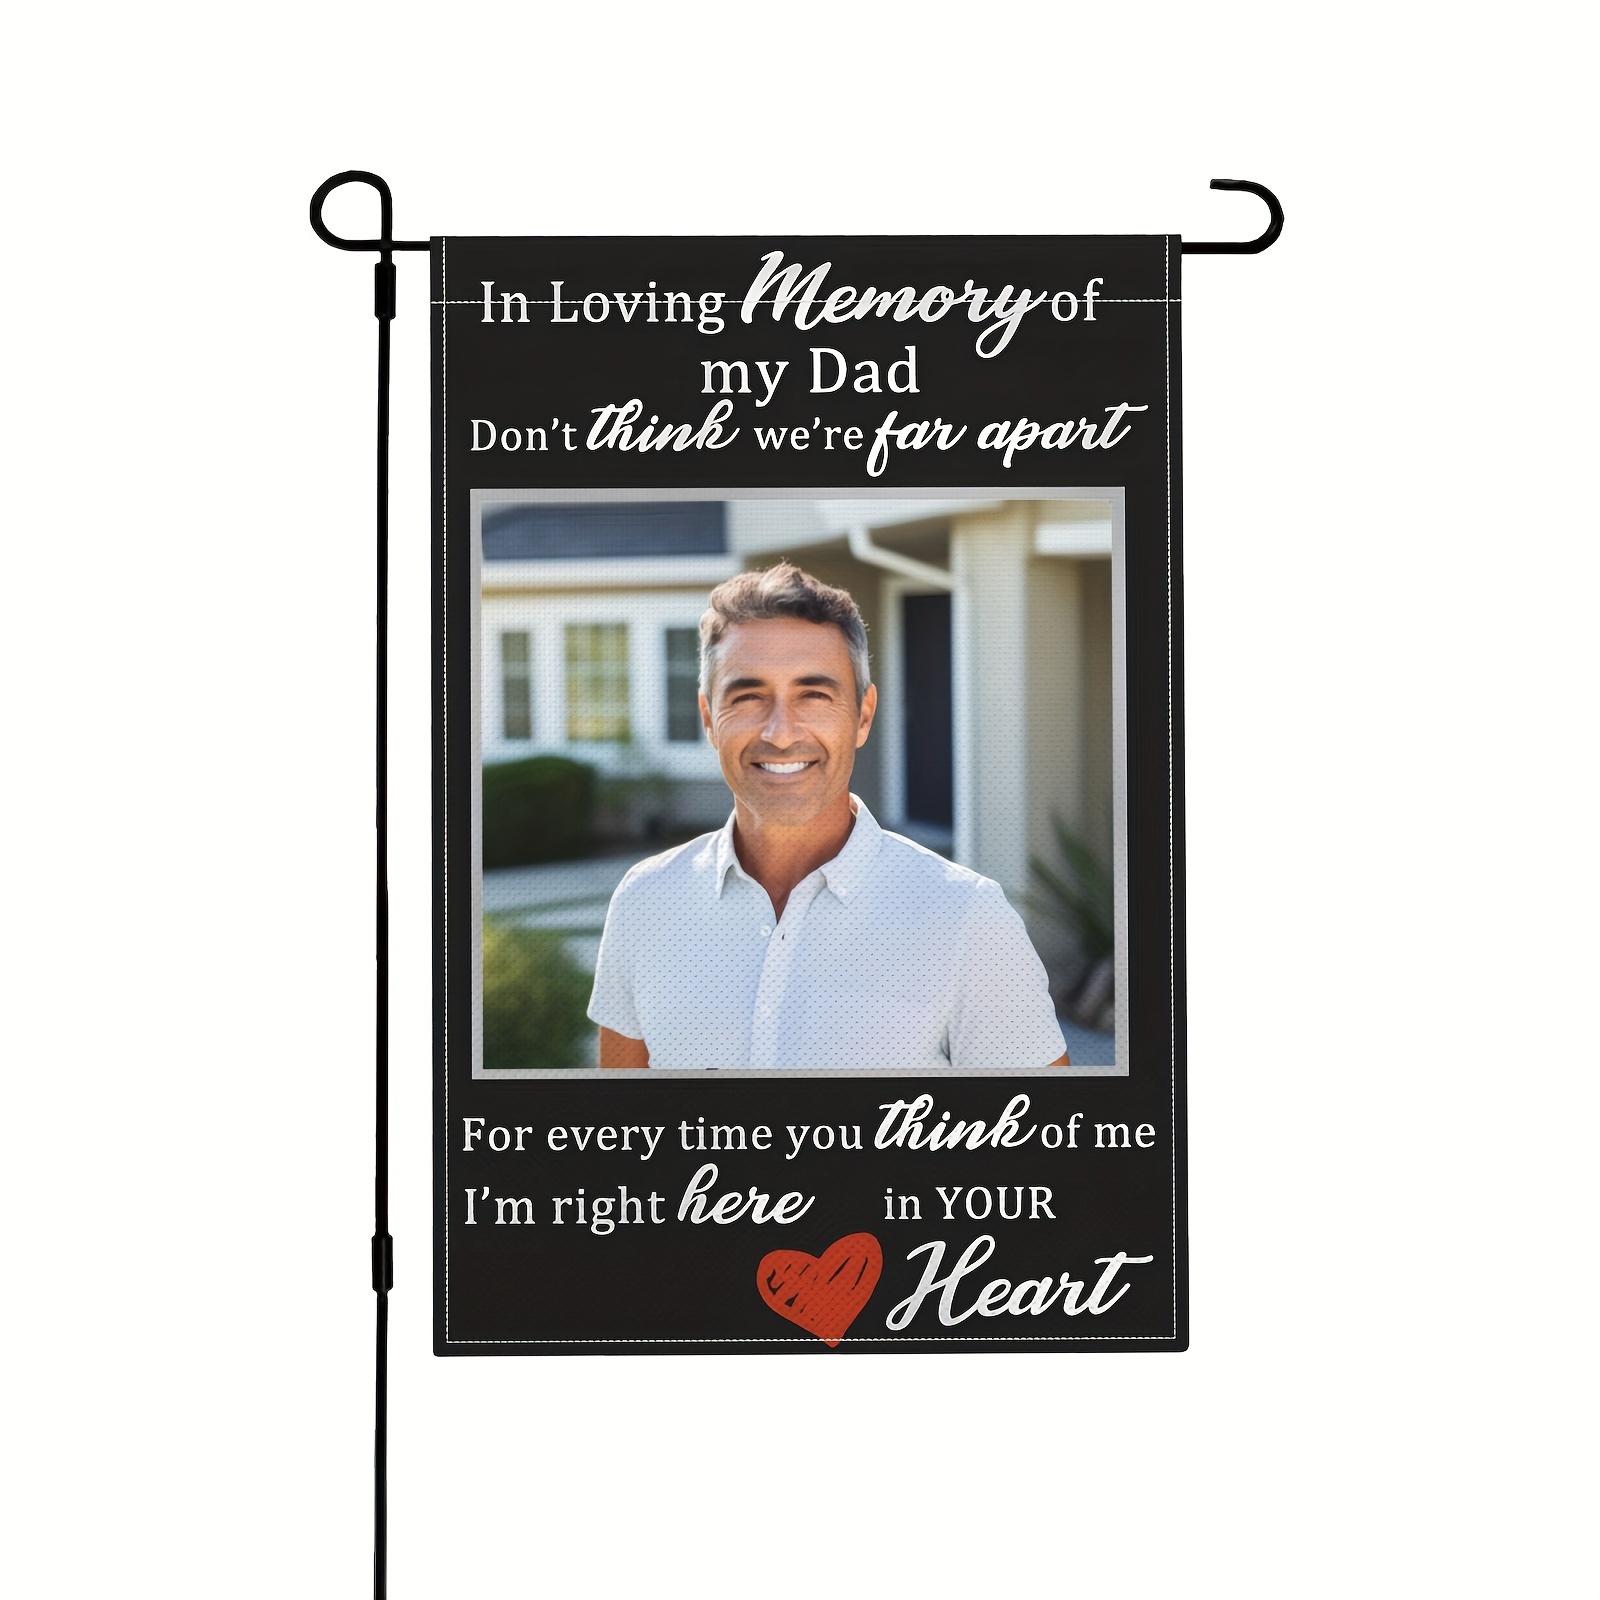 

1pc, Custom Memorial Flag Love My Dad Personalized Garden Flags With Photo, Customized Funeral Sign Memorial Gifts, Decorations For Cemetery Grave Outdoor Yard Lawn 12x18in (no Metal Brace)